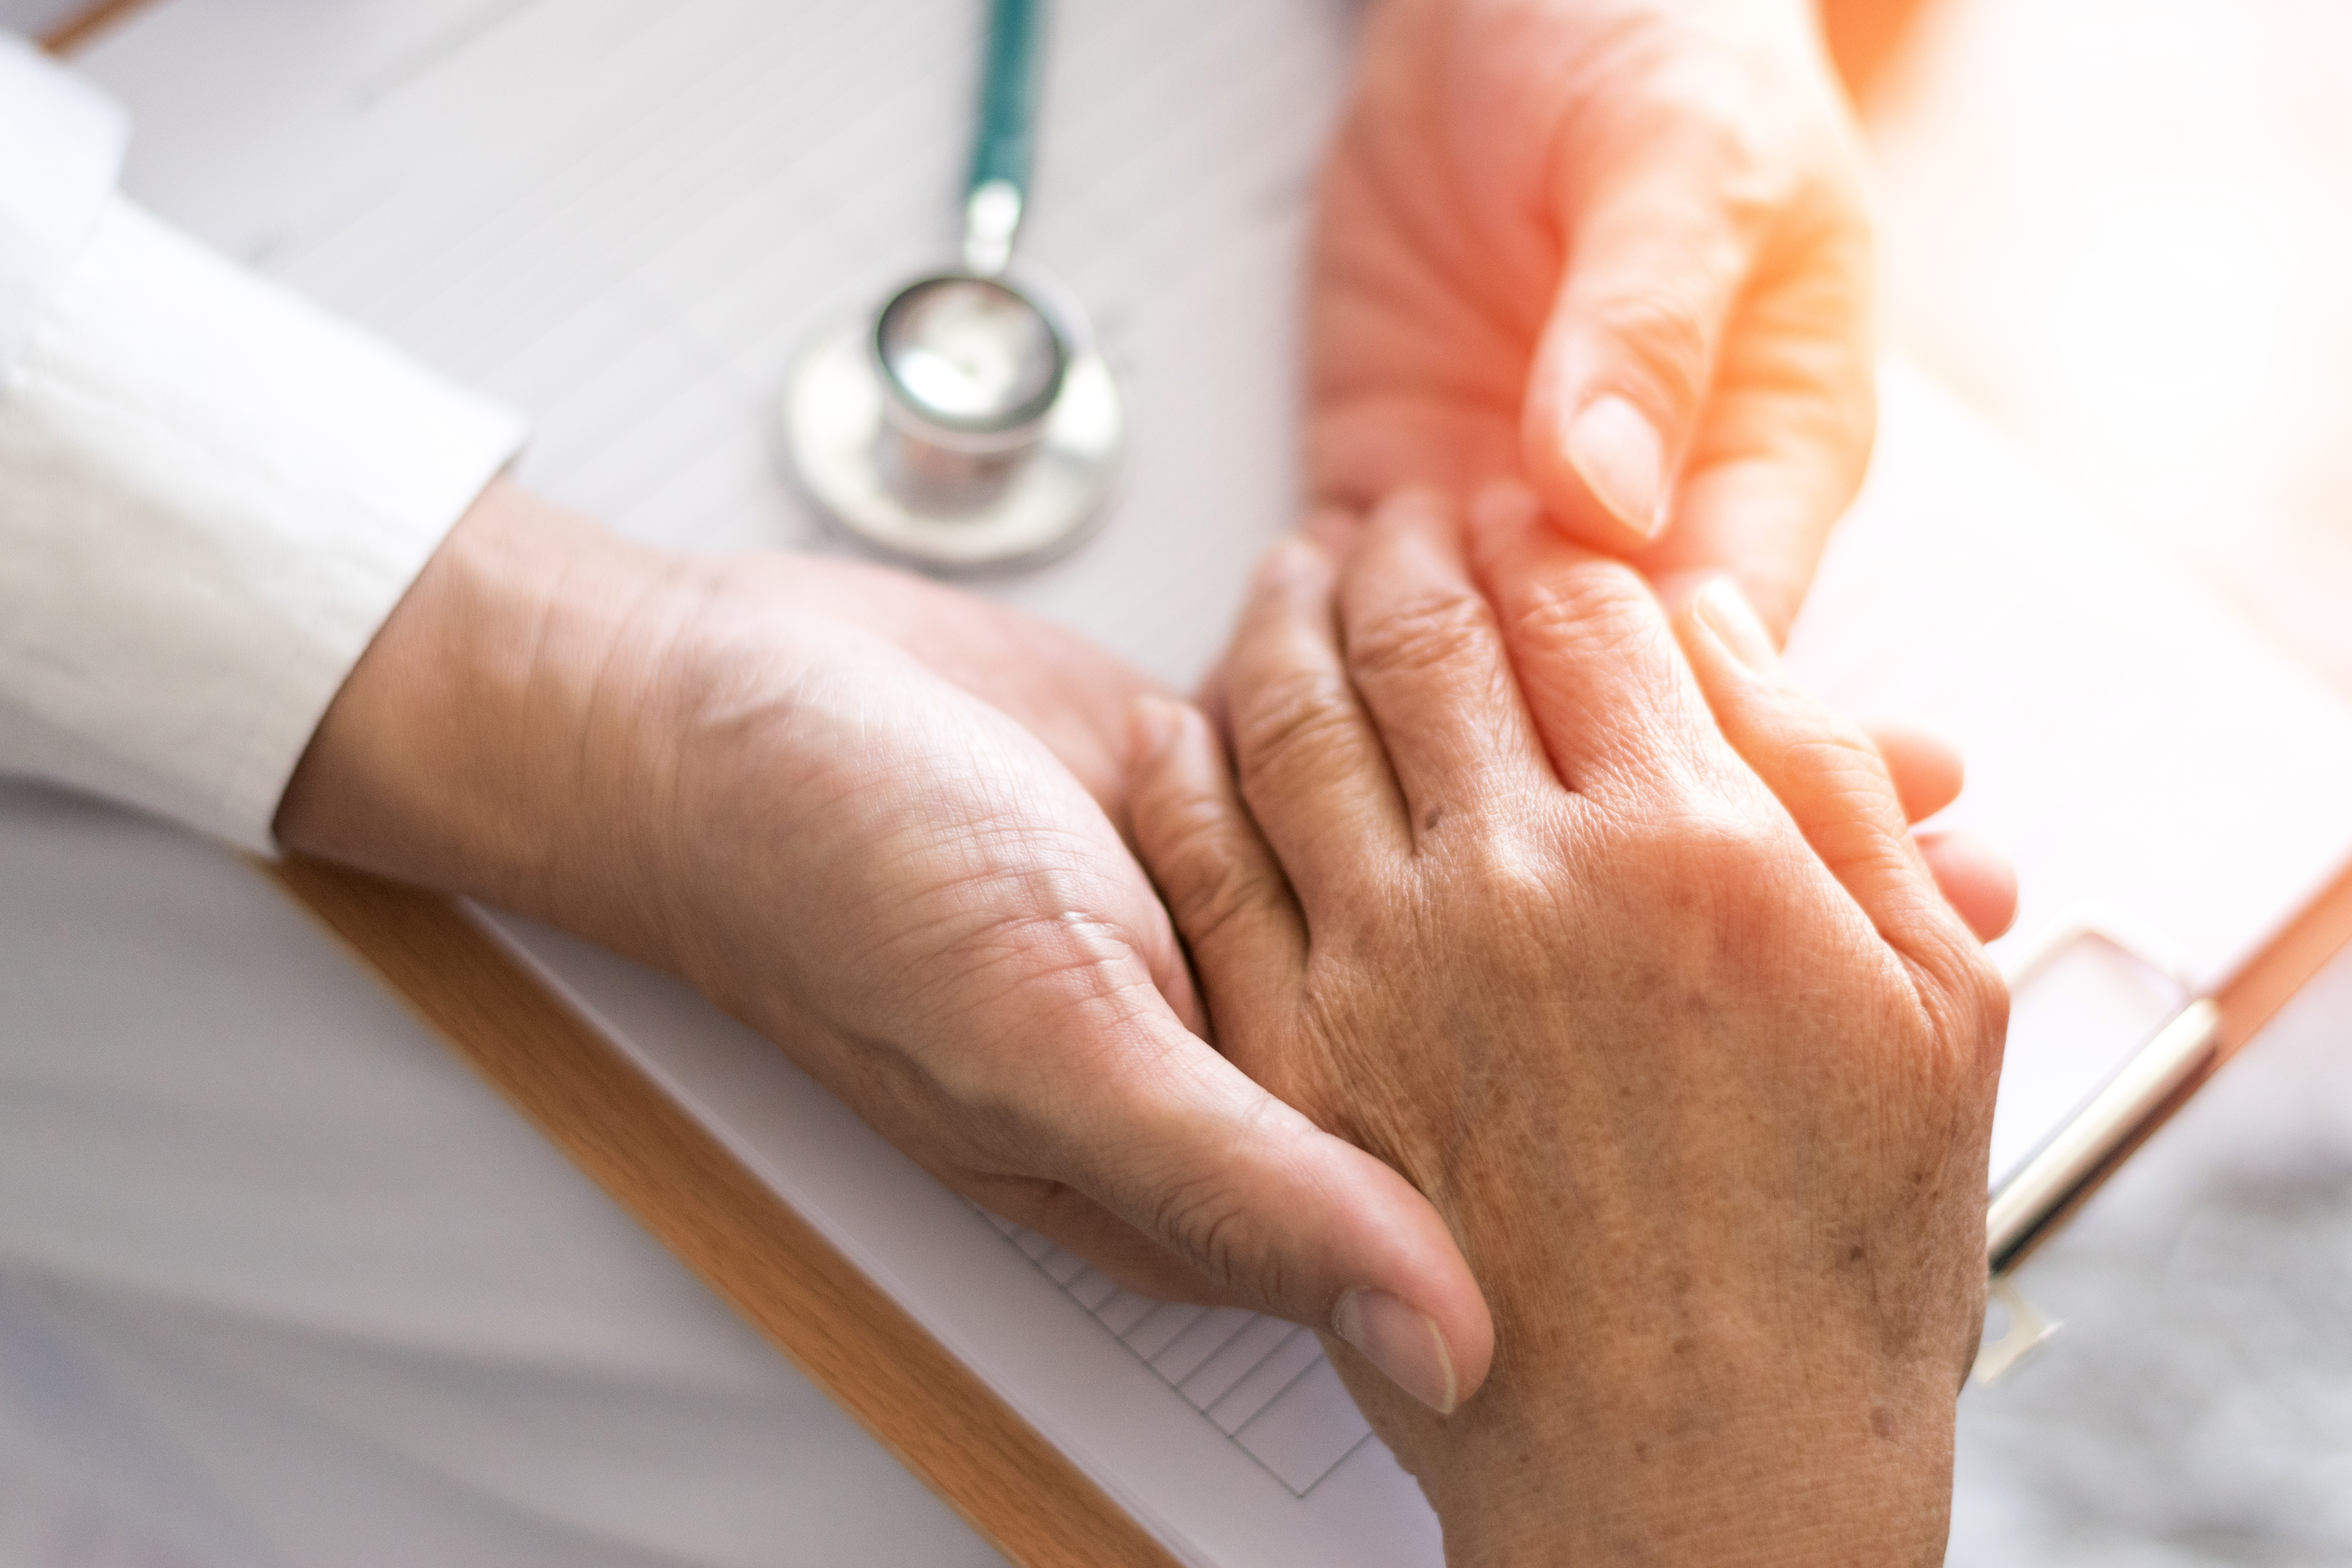 health care professional examining a patient's hand